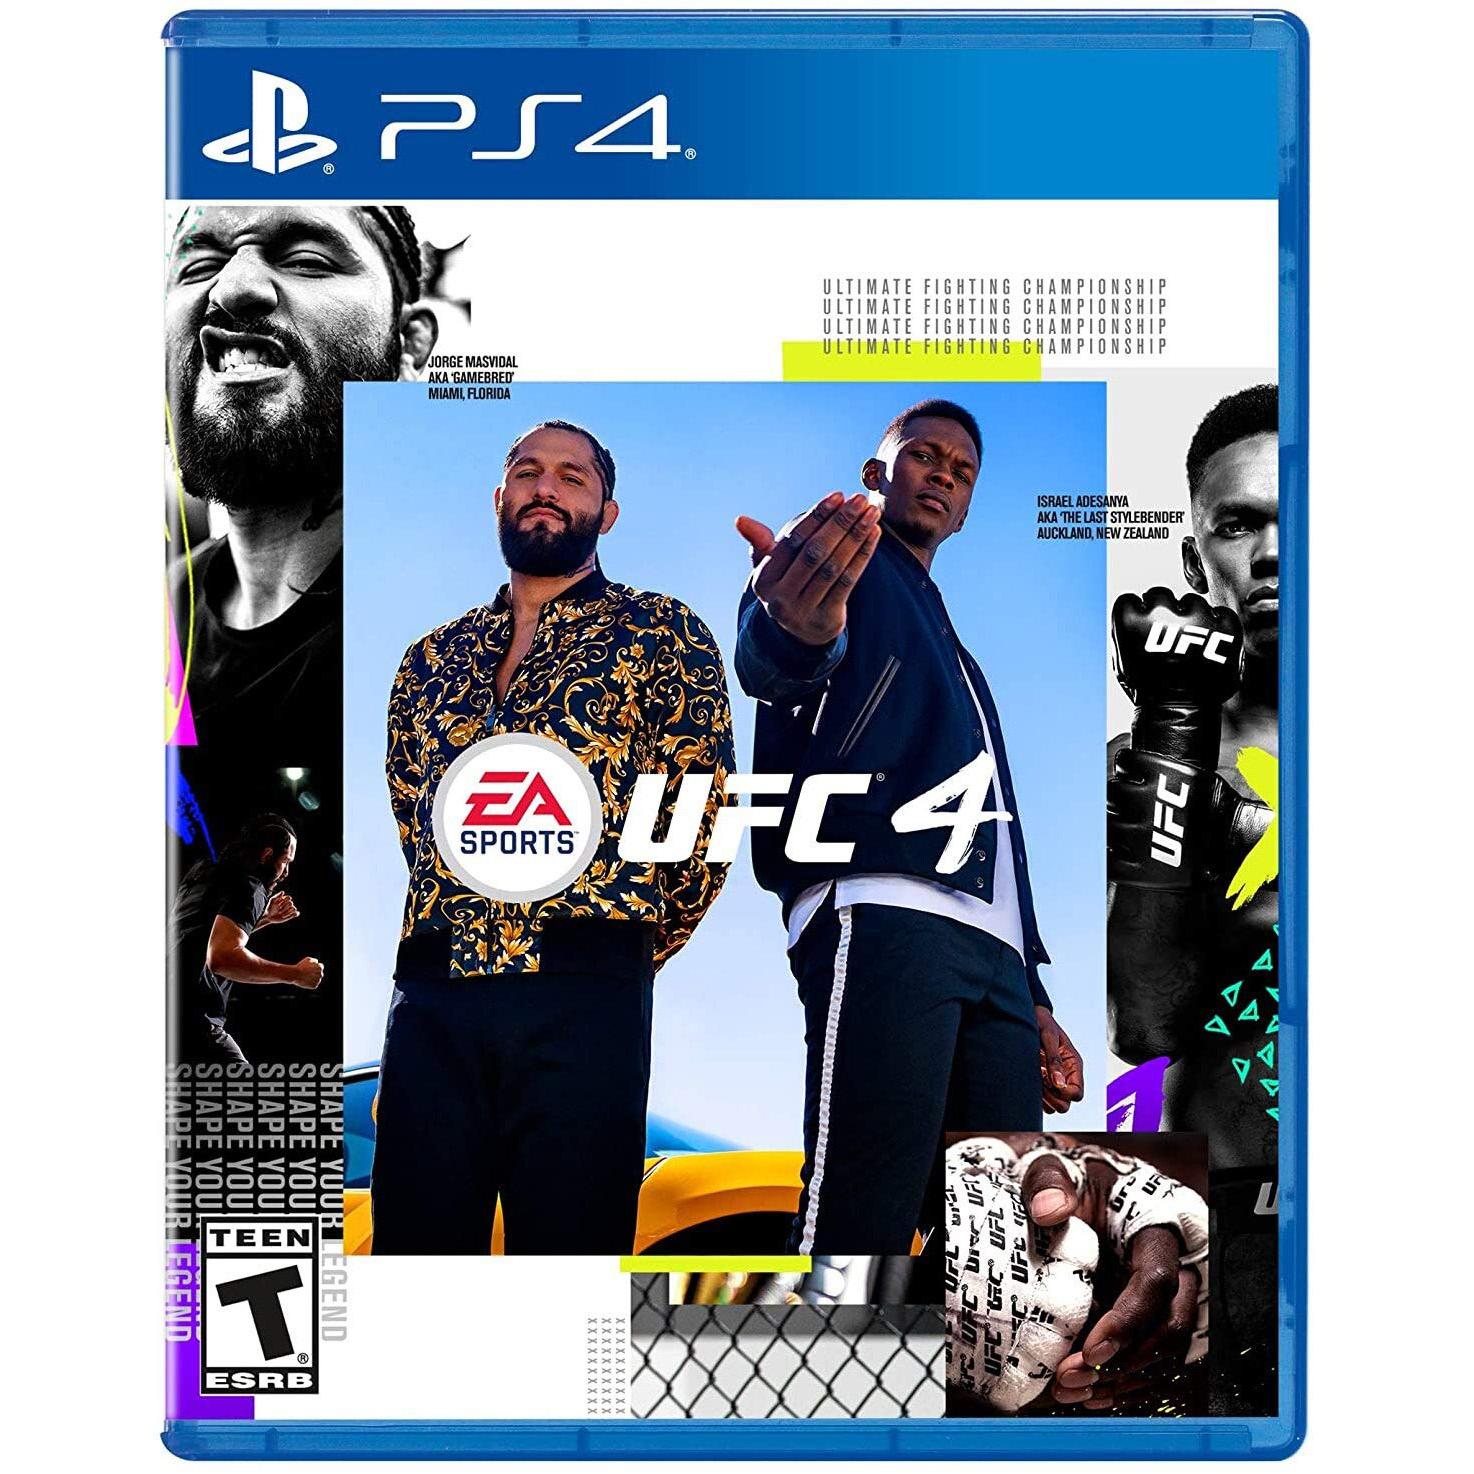 EA SPORTS UFC 4 PS4 or Xbox One for $29.99 Shipped